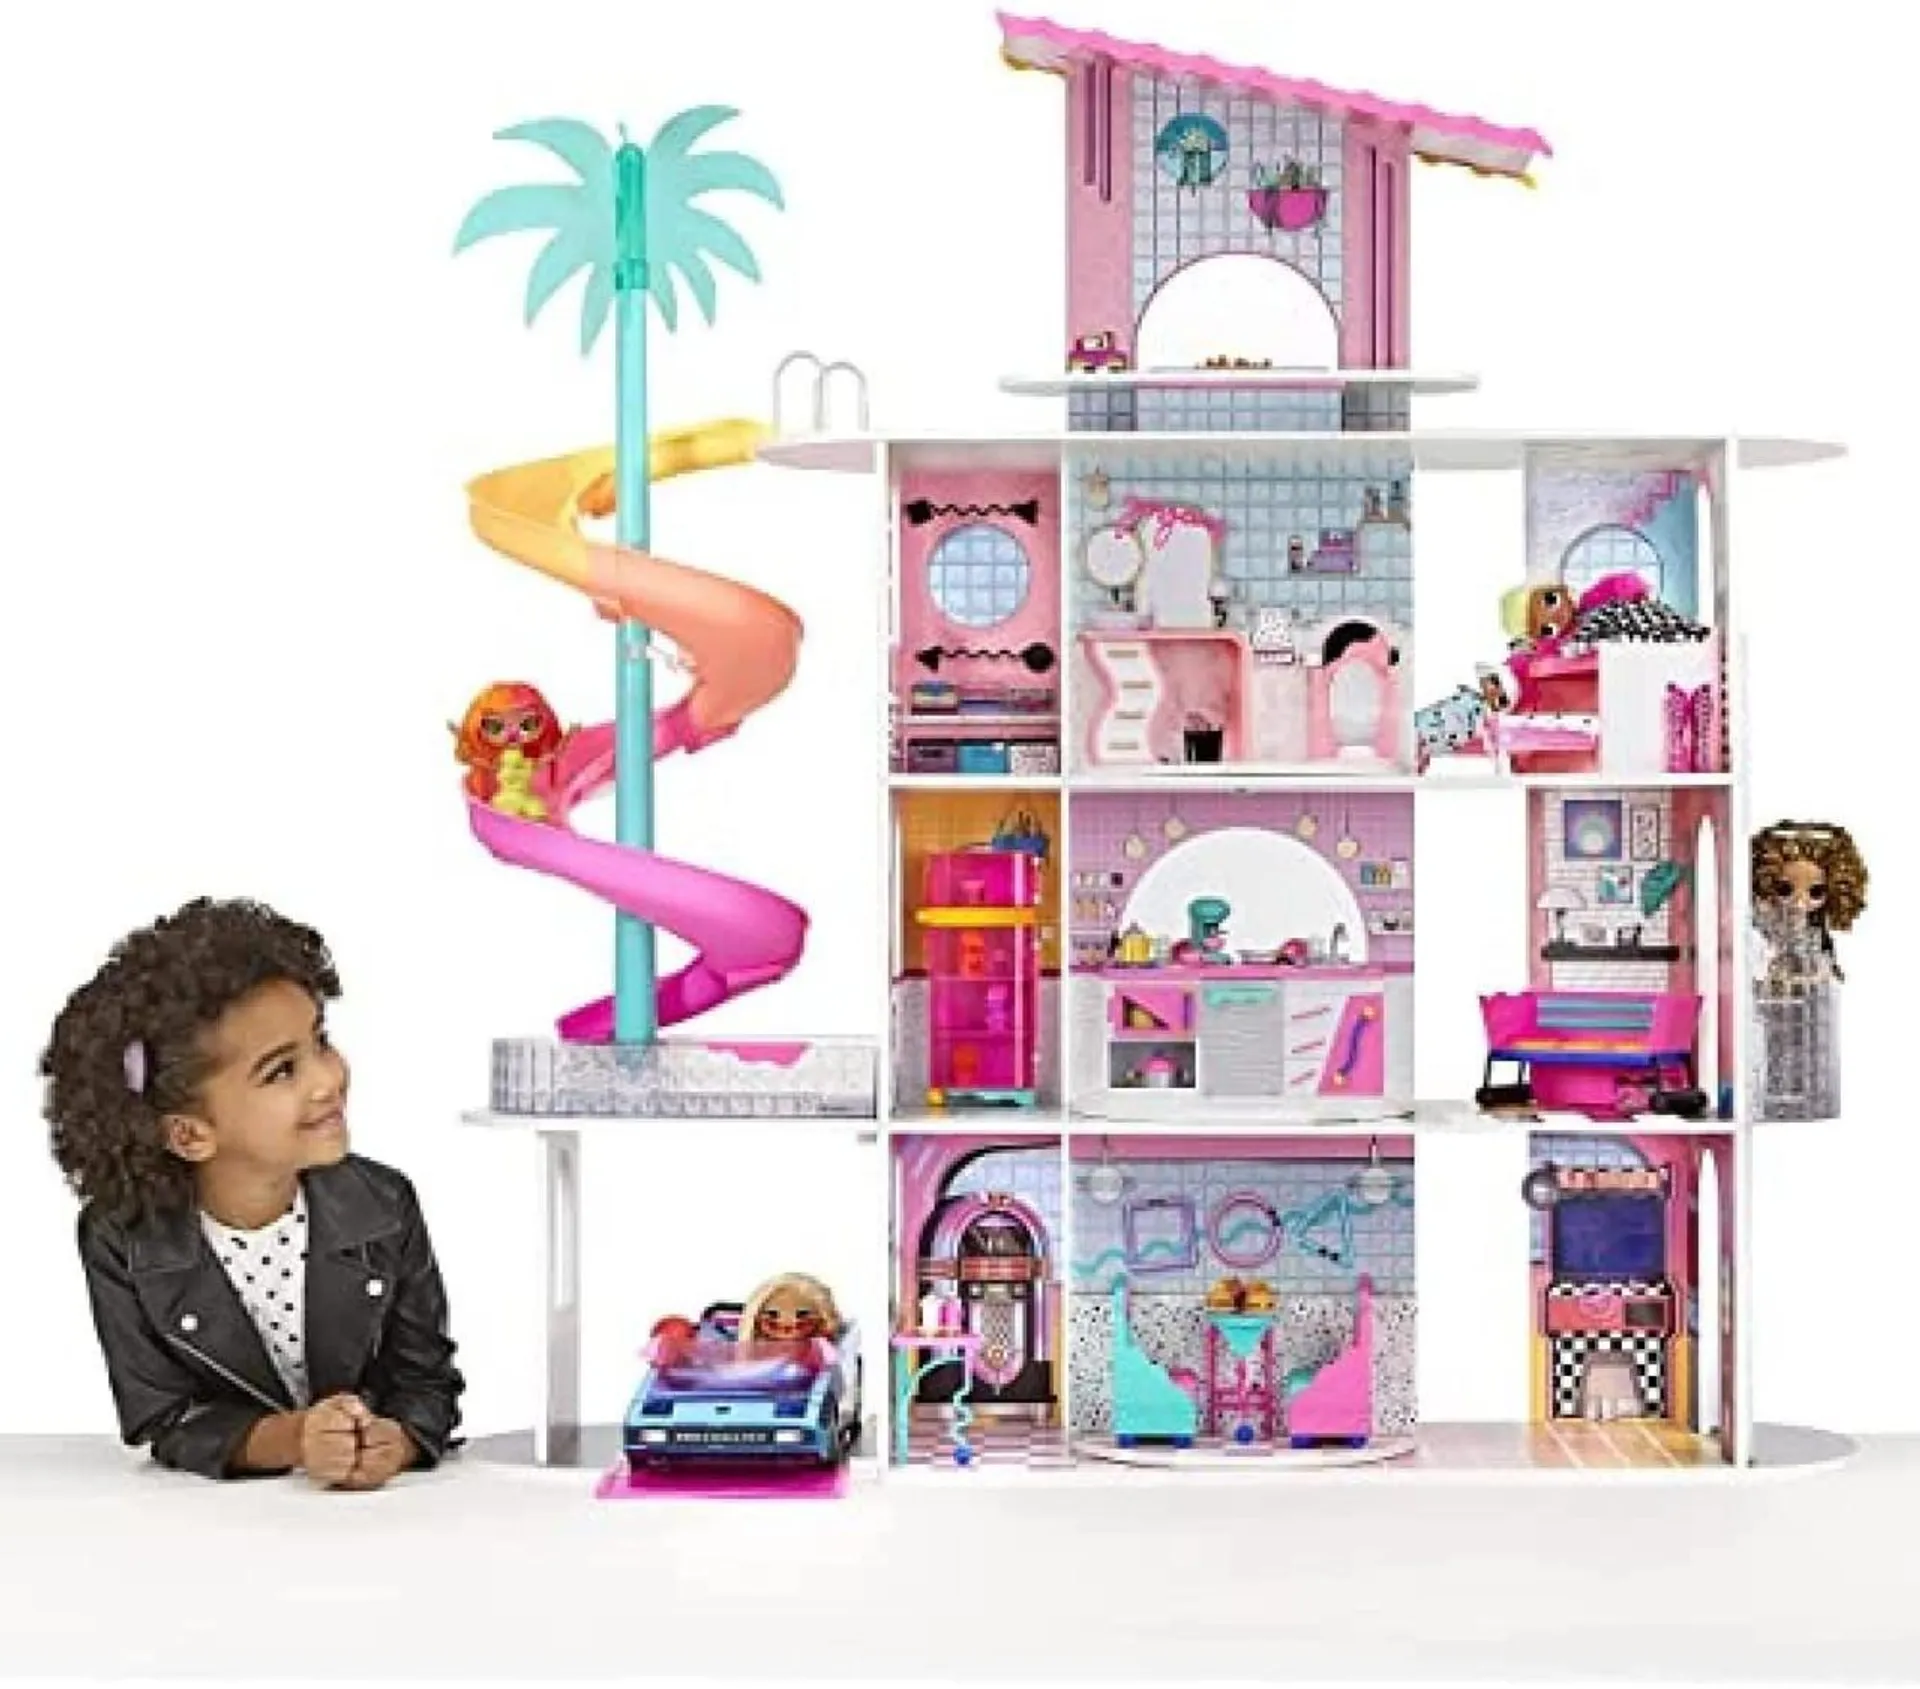 L.O.L. Surprise OMG House of Surprises New Real Wood Doll House